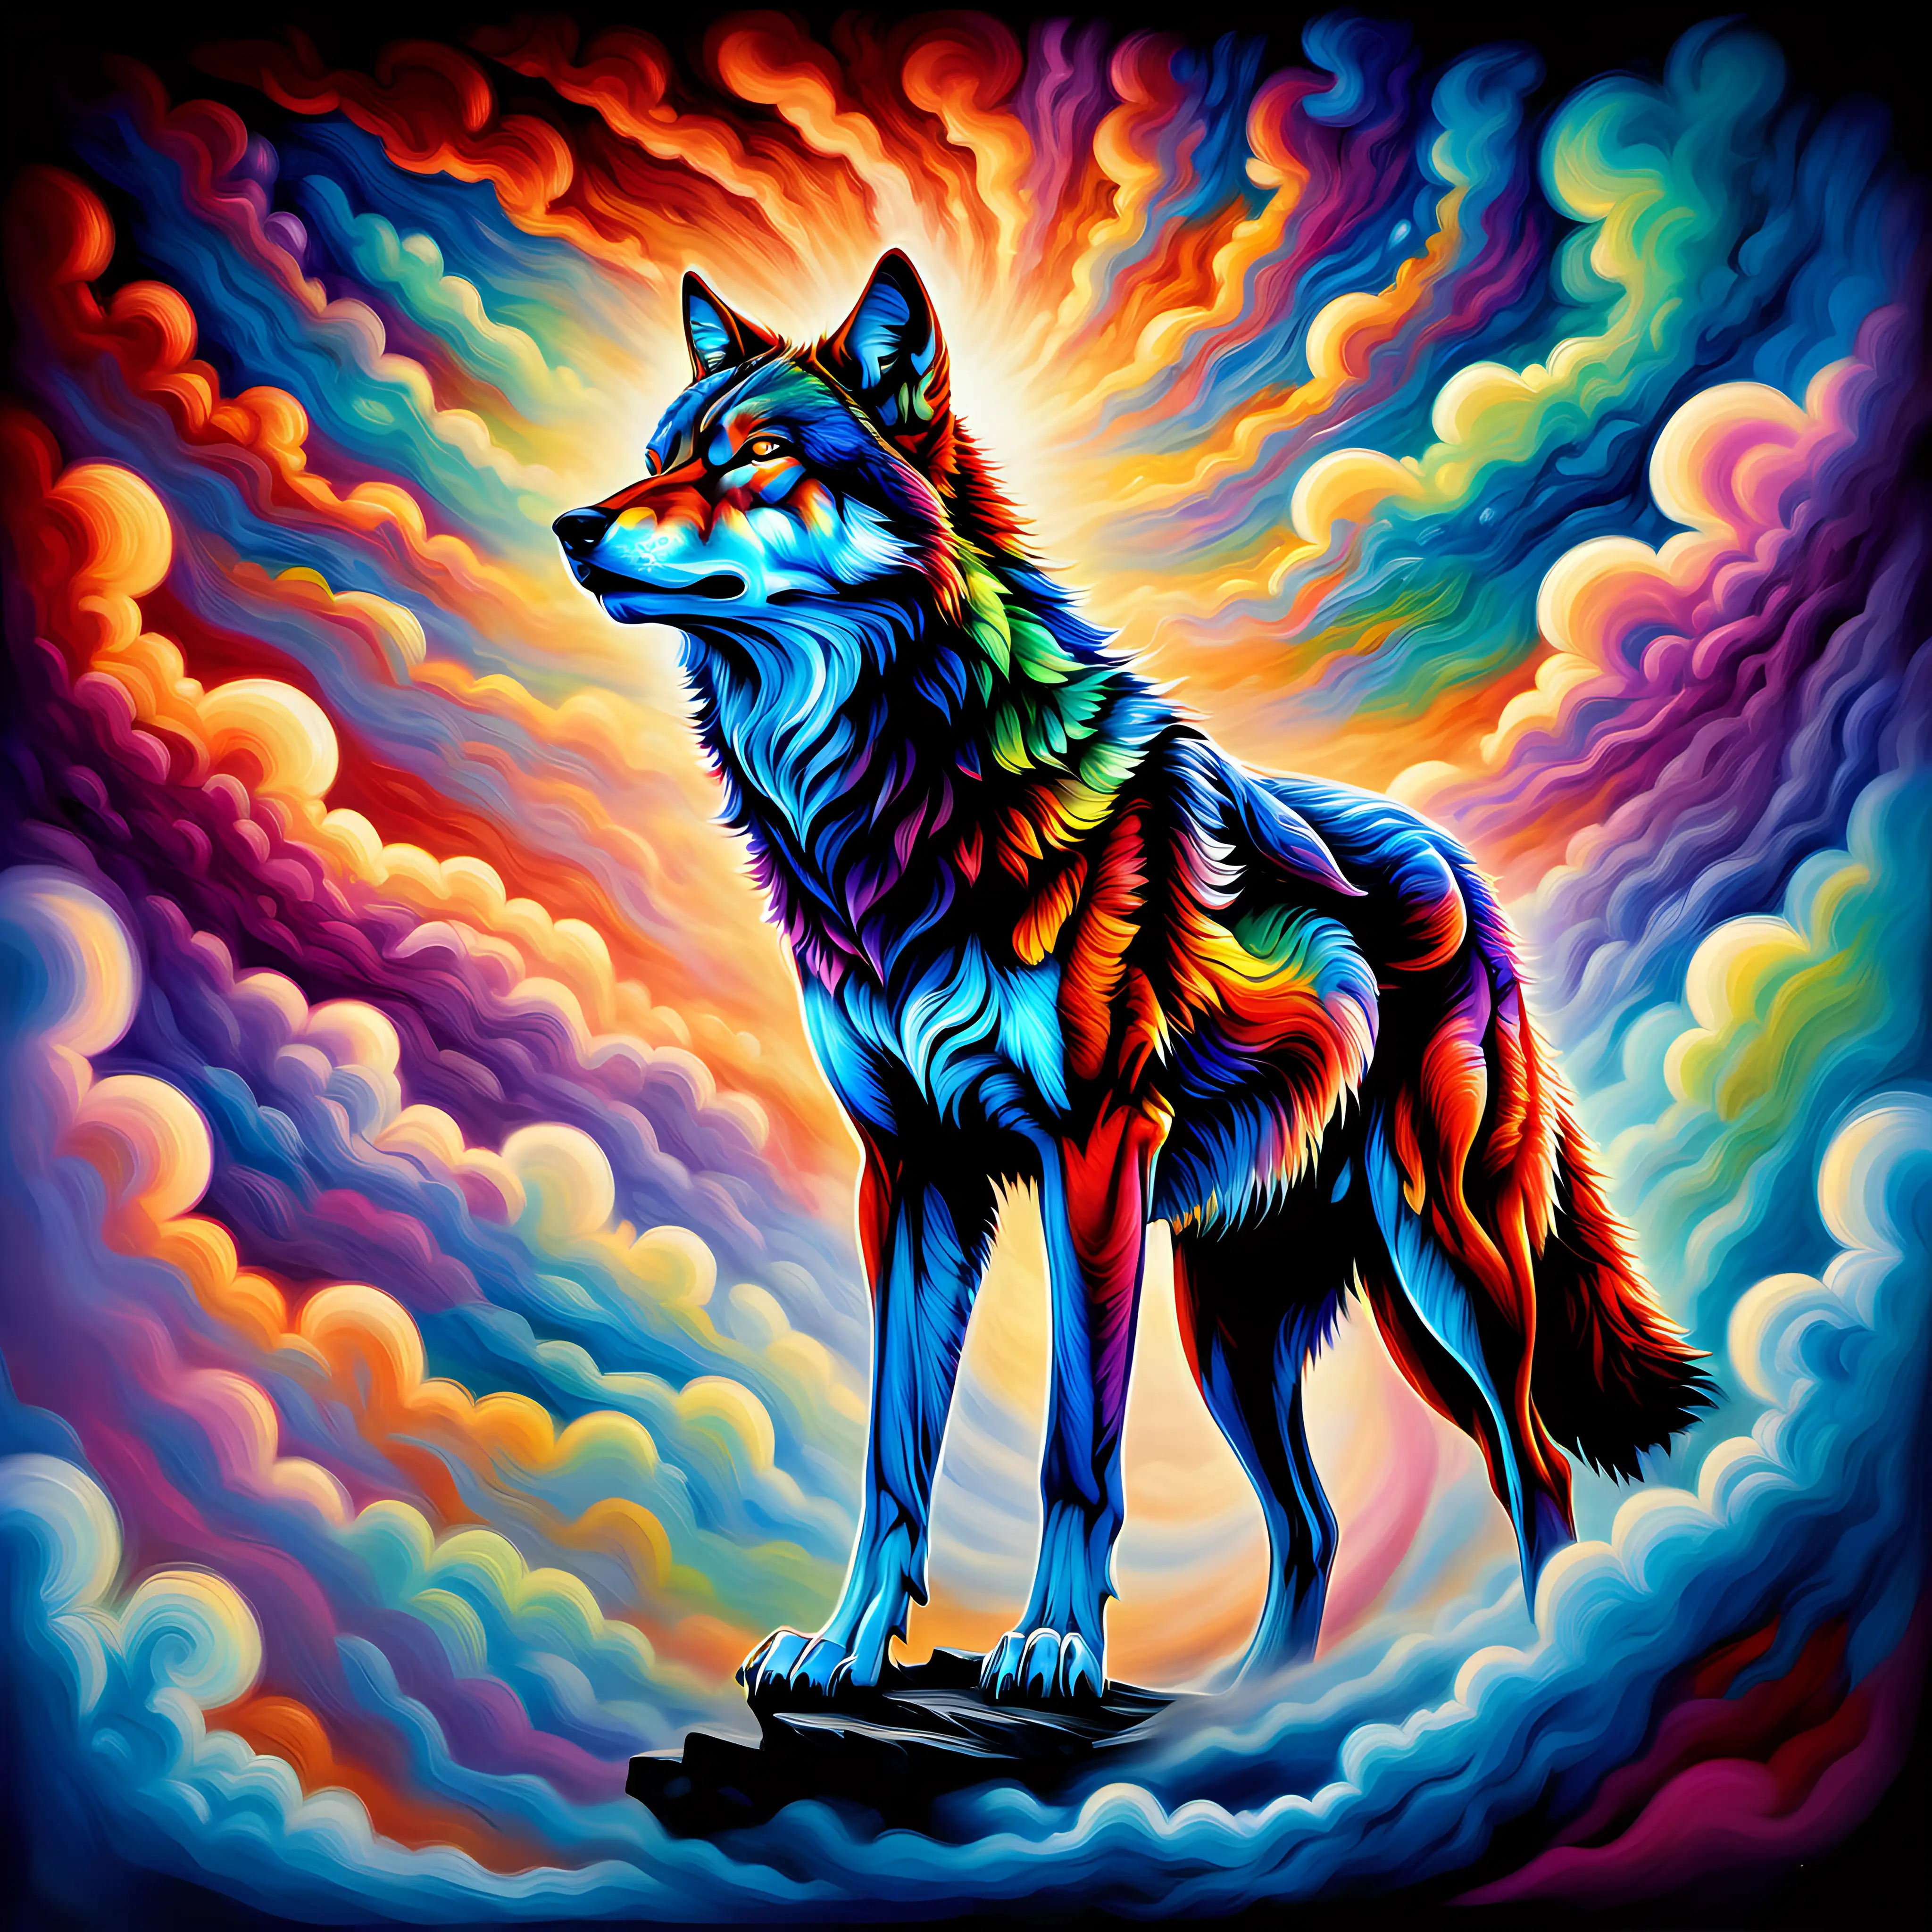 Vividly Painted Wolf in Iridescent Sky Symbolizing Primal Force and Beauty